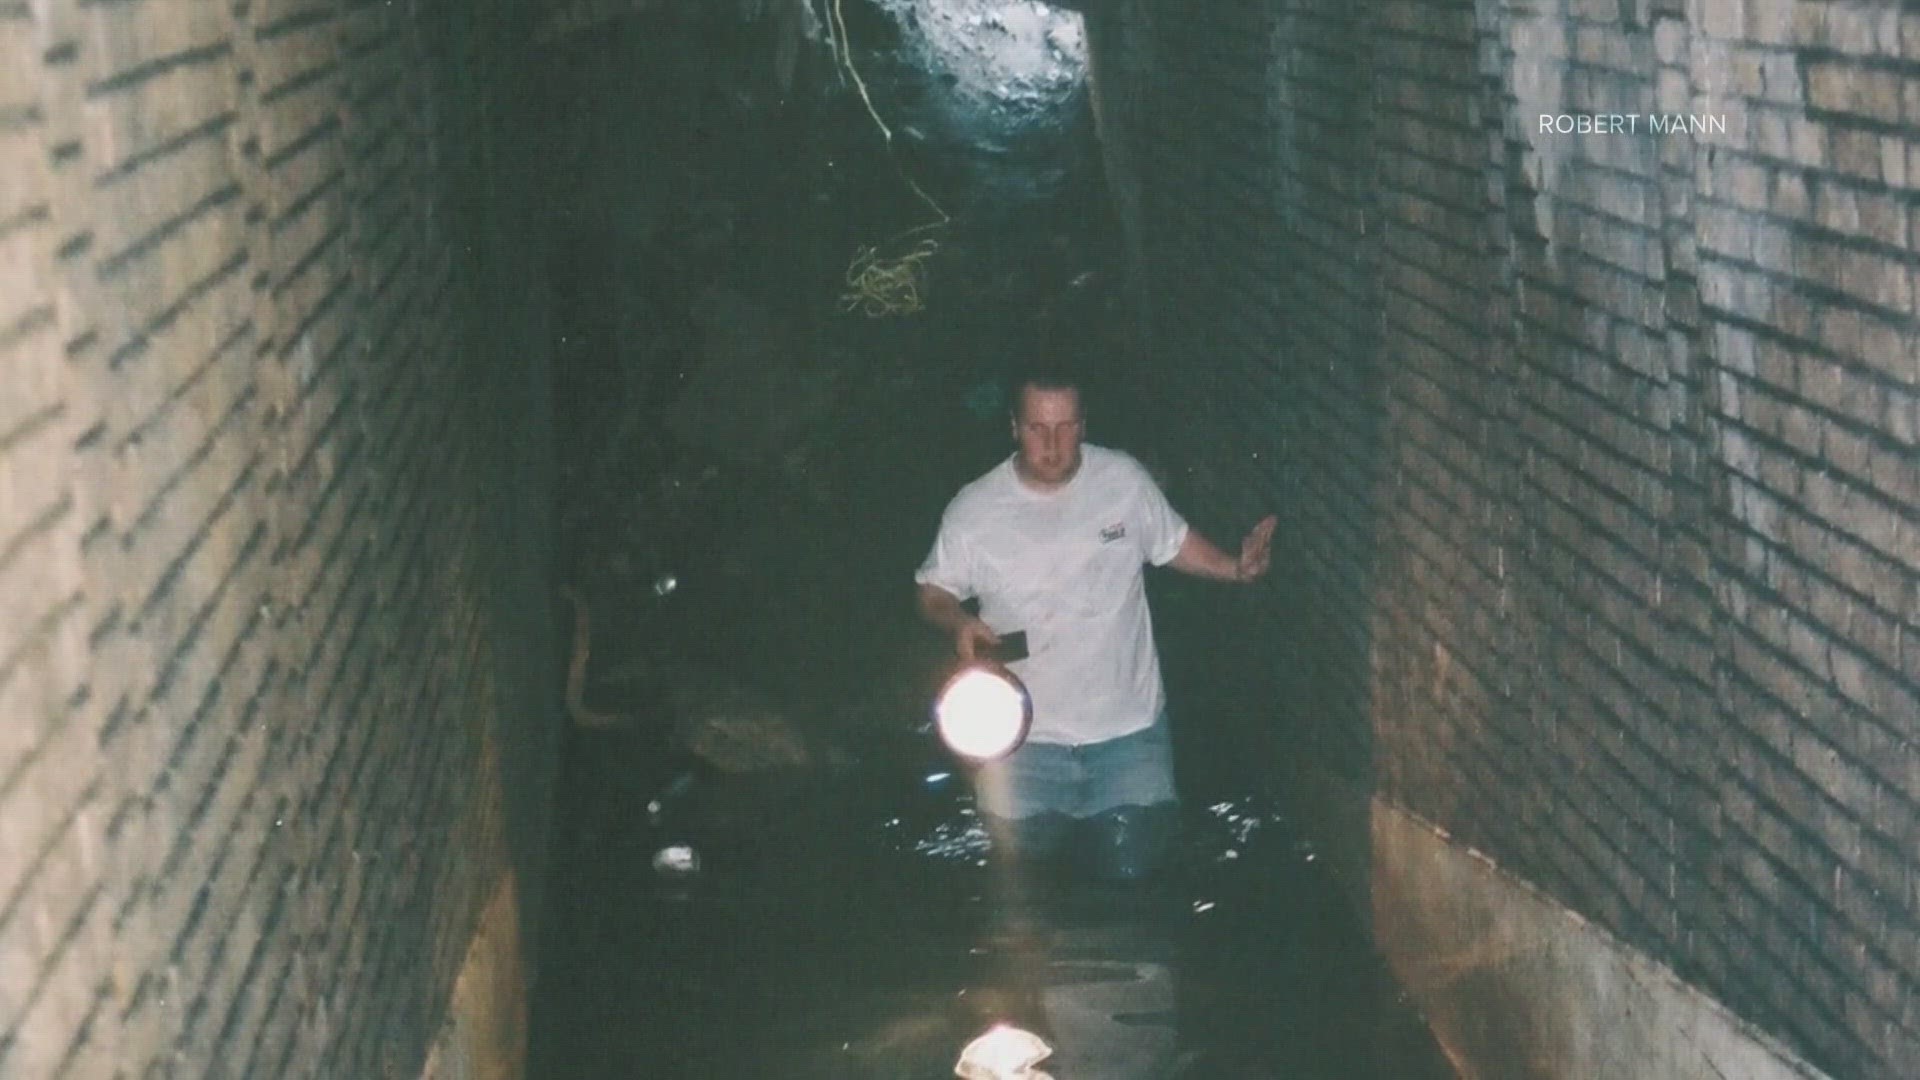 The Jacksonville Terminal Pedestrian Tunnels are locked in time, still intact and buried underneath vegetation and debris since the train station's closure in 1974.